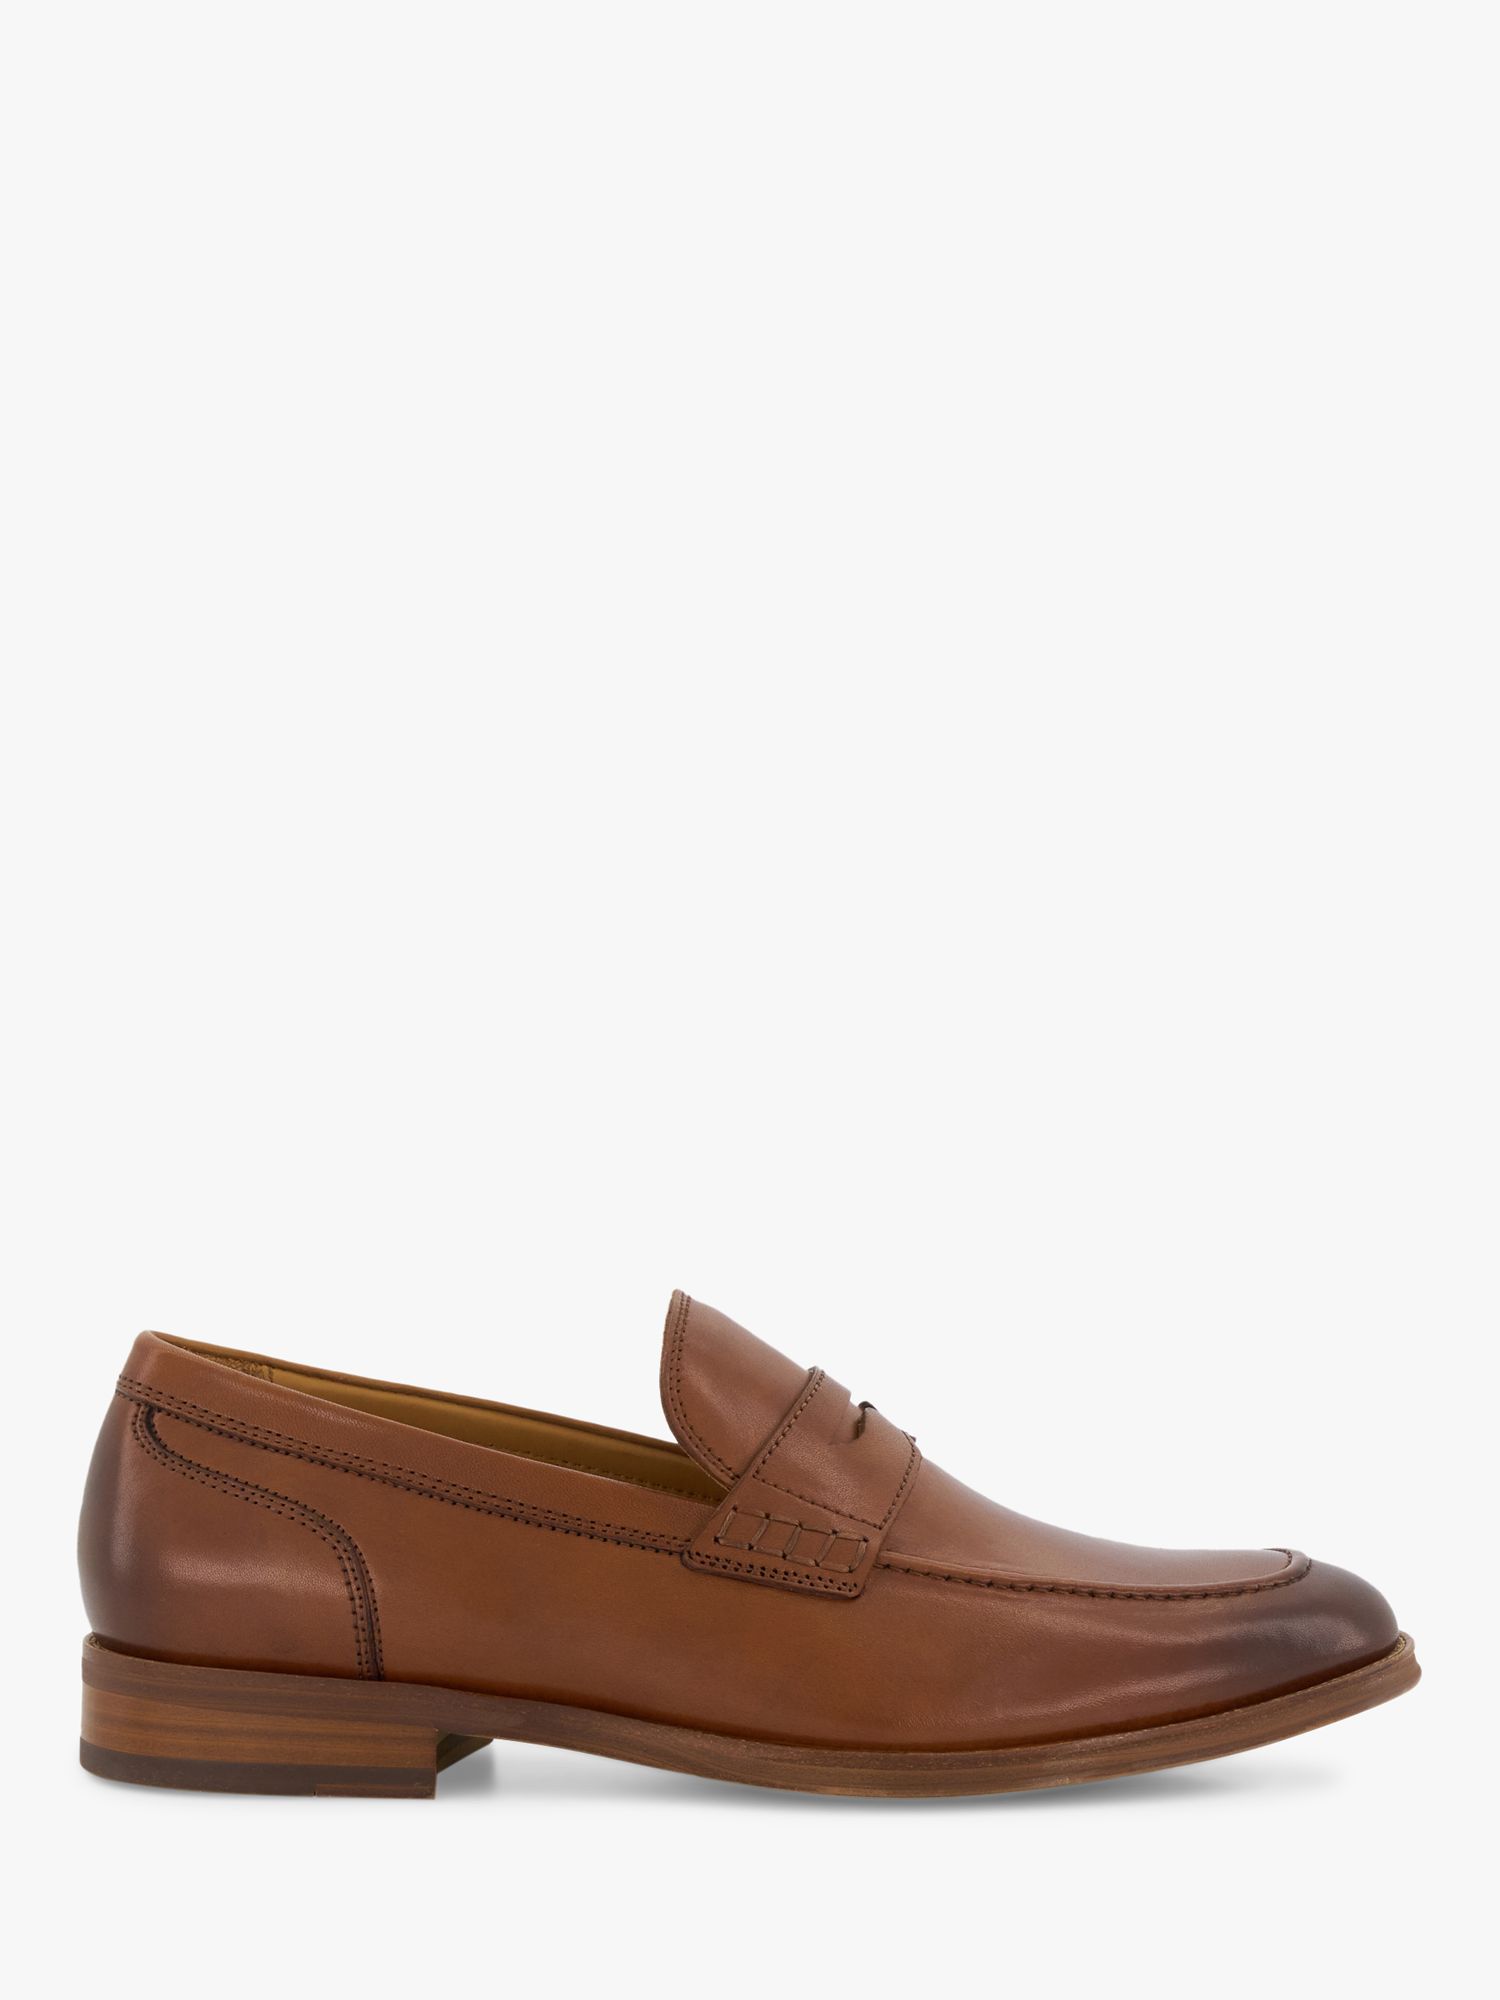 Dune Wide Fit Sulli Leather Penny Loafers, Tan, 11